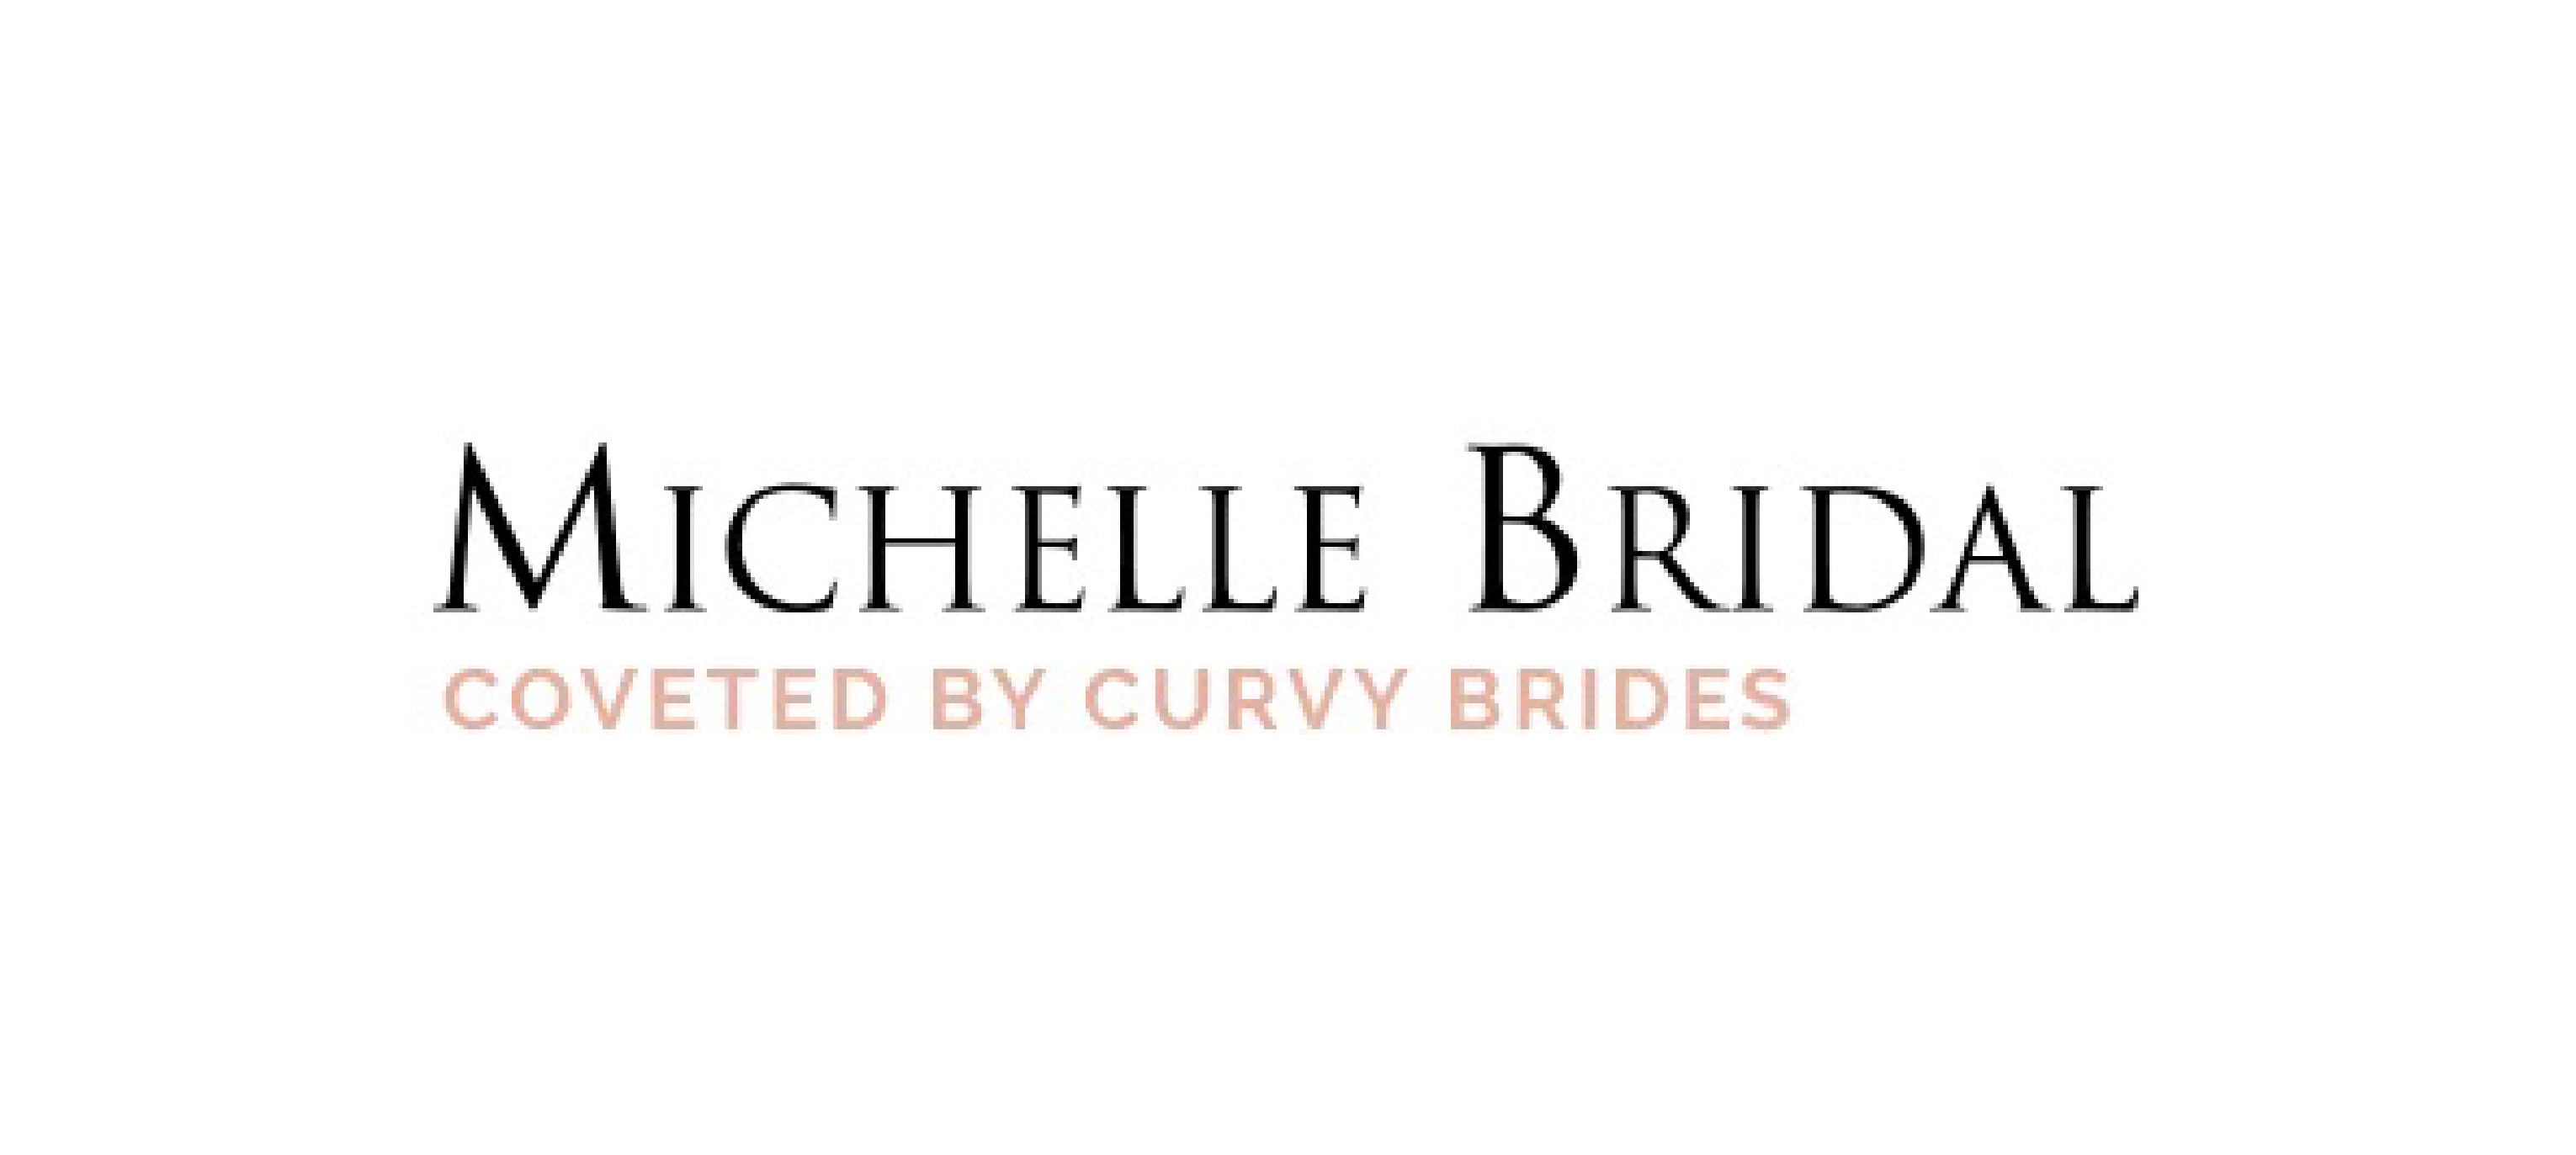 Michelle Bridal Coveted By Curvy Brides